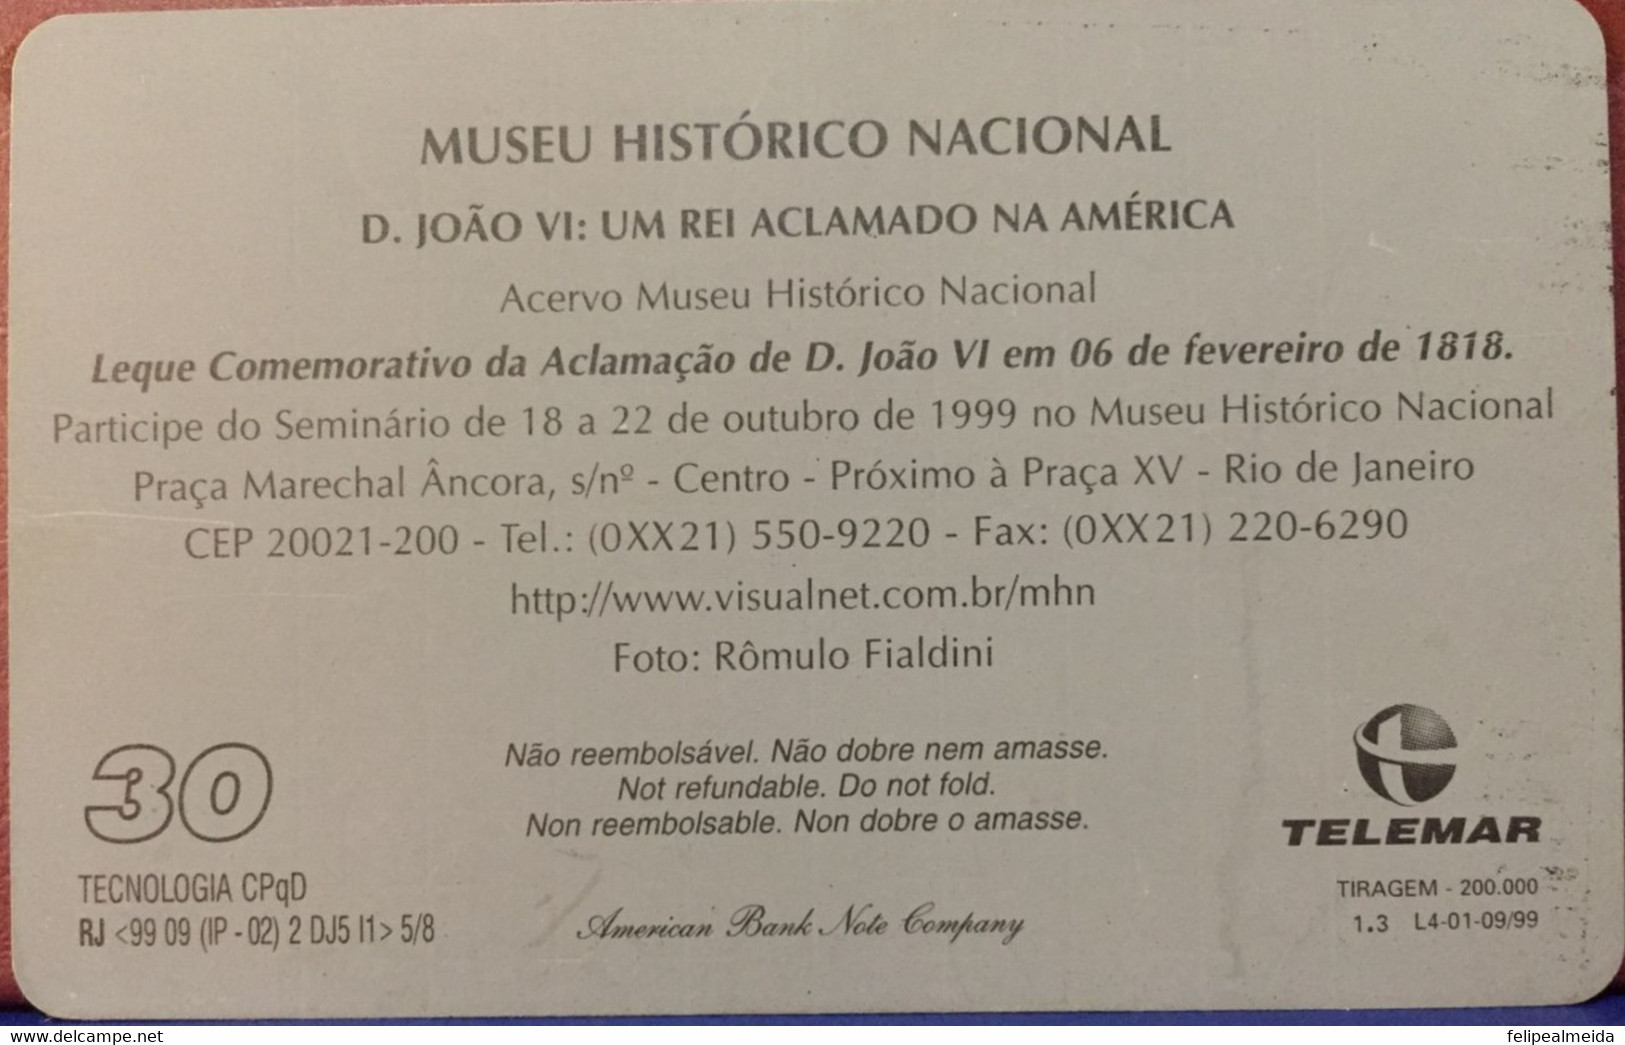 Phone Card Manufactured By Telebrasr In 1997 - Series Museu Historico Nacional - Photo Fan Commemorating The Acclamation - Cultural